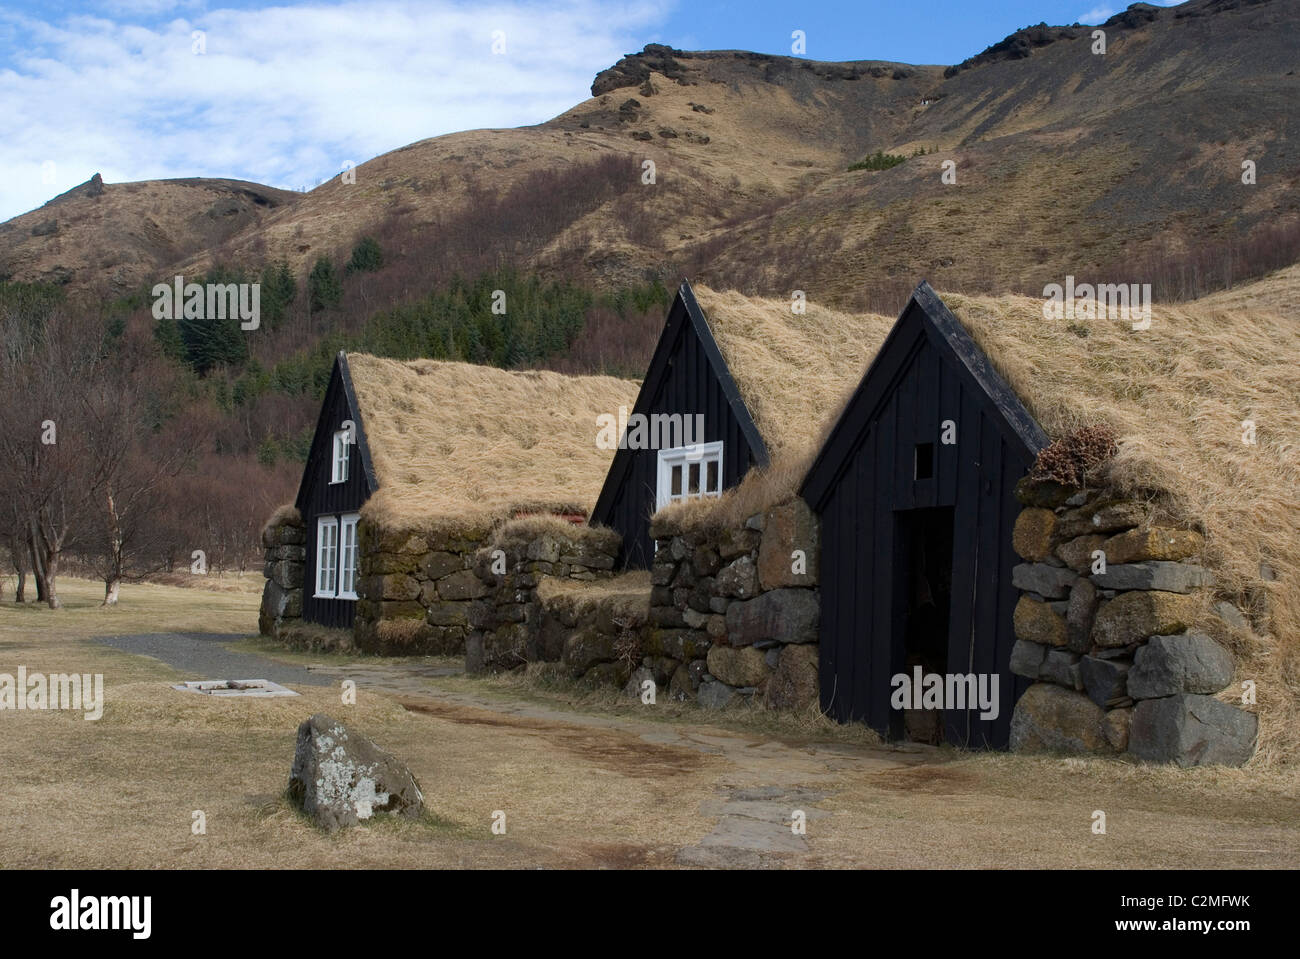 Traditional turf, half underground houses from the last century (and before), Skoga Museum, near Skogafoss, Southern Iceland Stock Photo